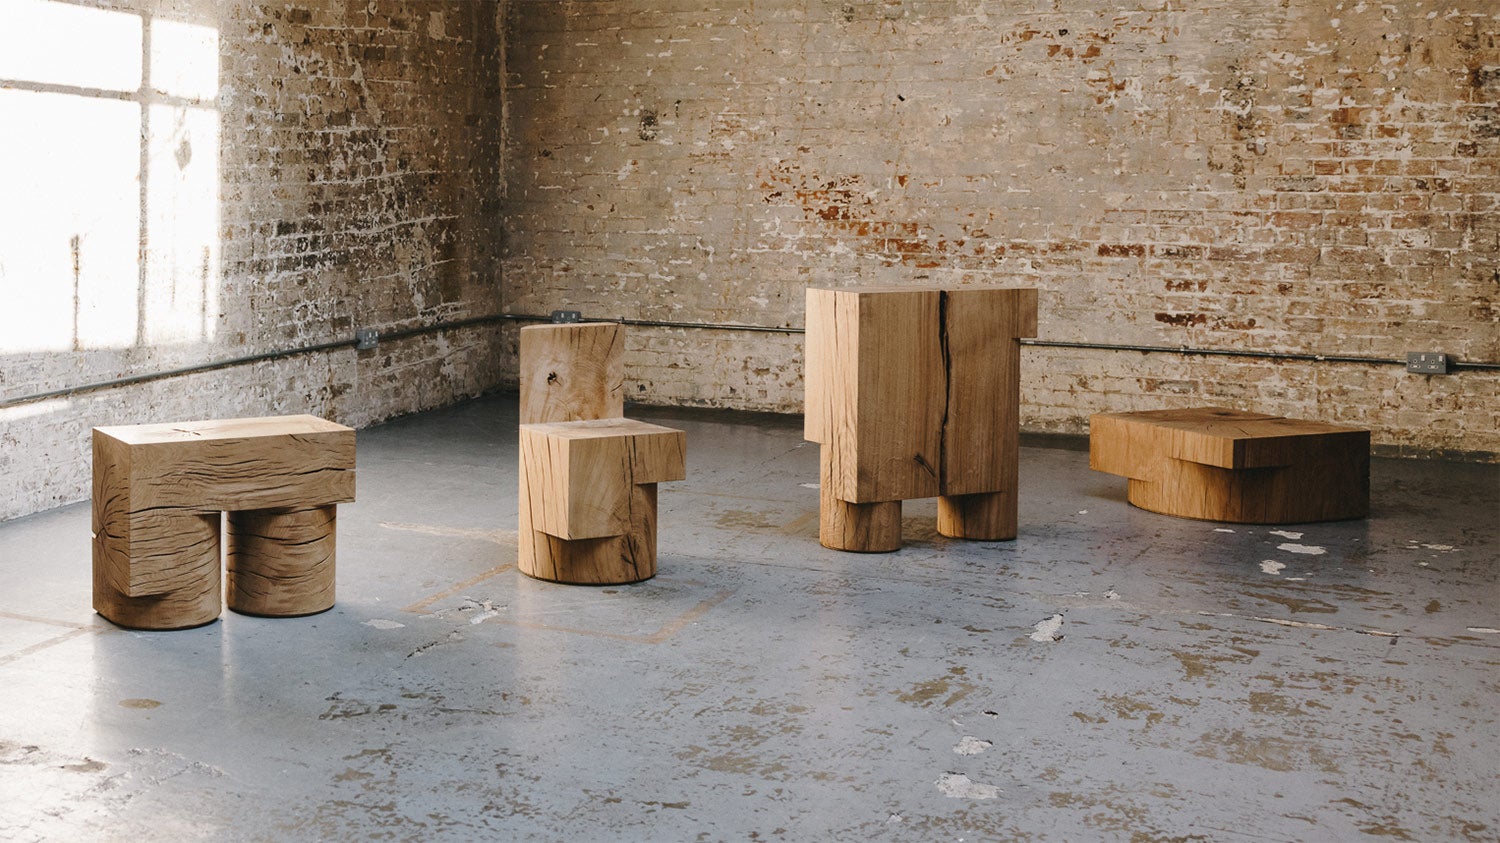 The ‘Off Cuts’ collection, made from tree stumps and crowns, blends rustic materials with modern form